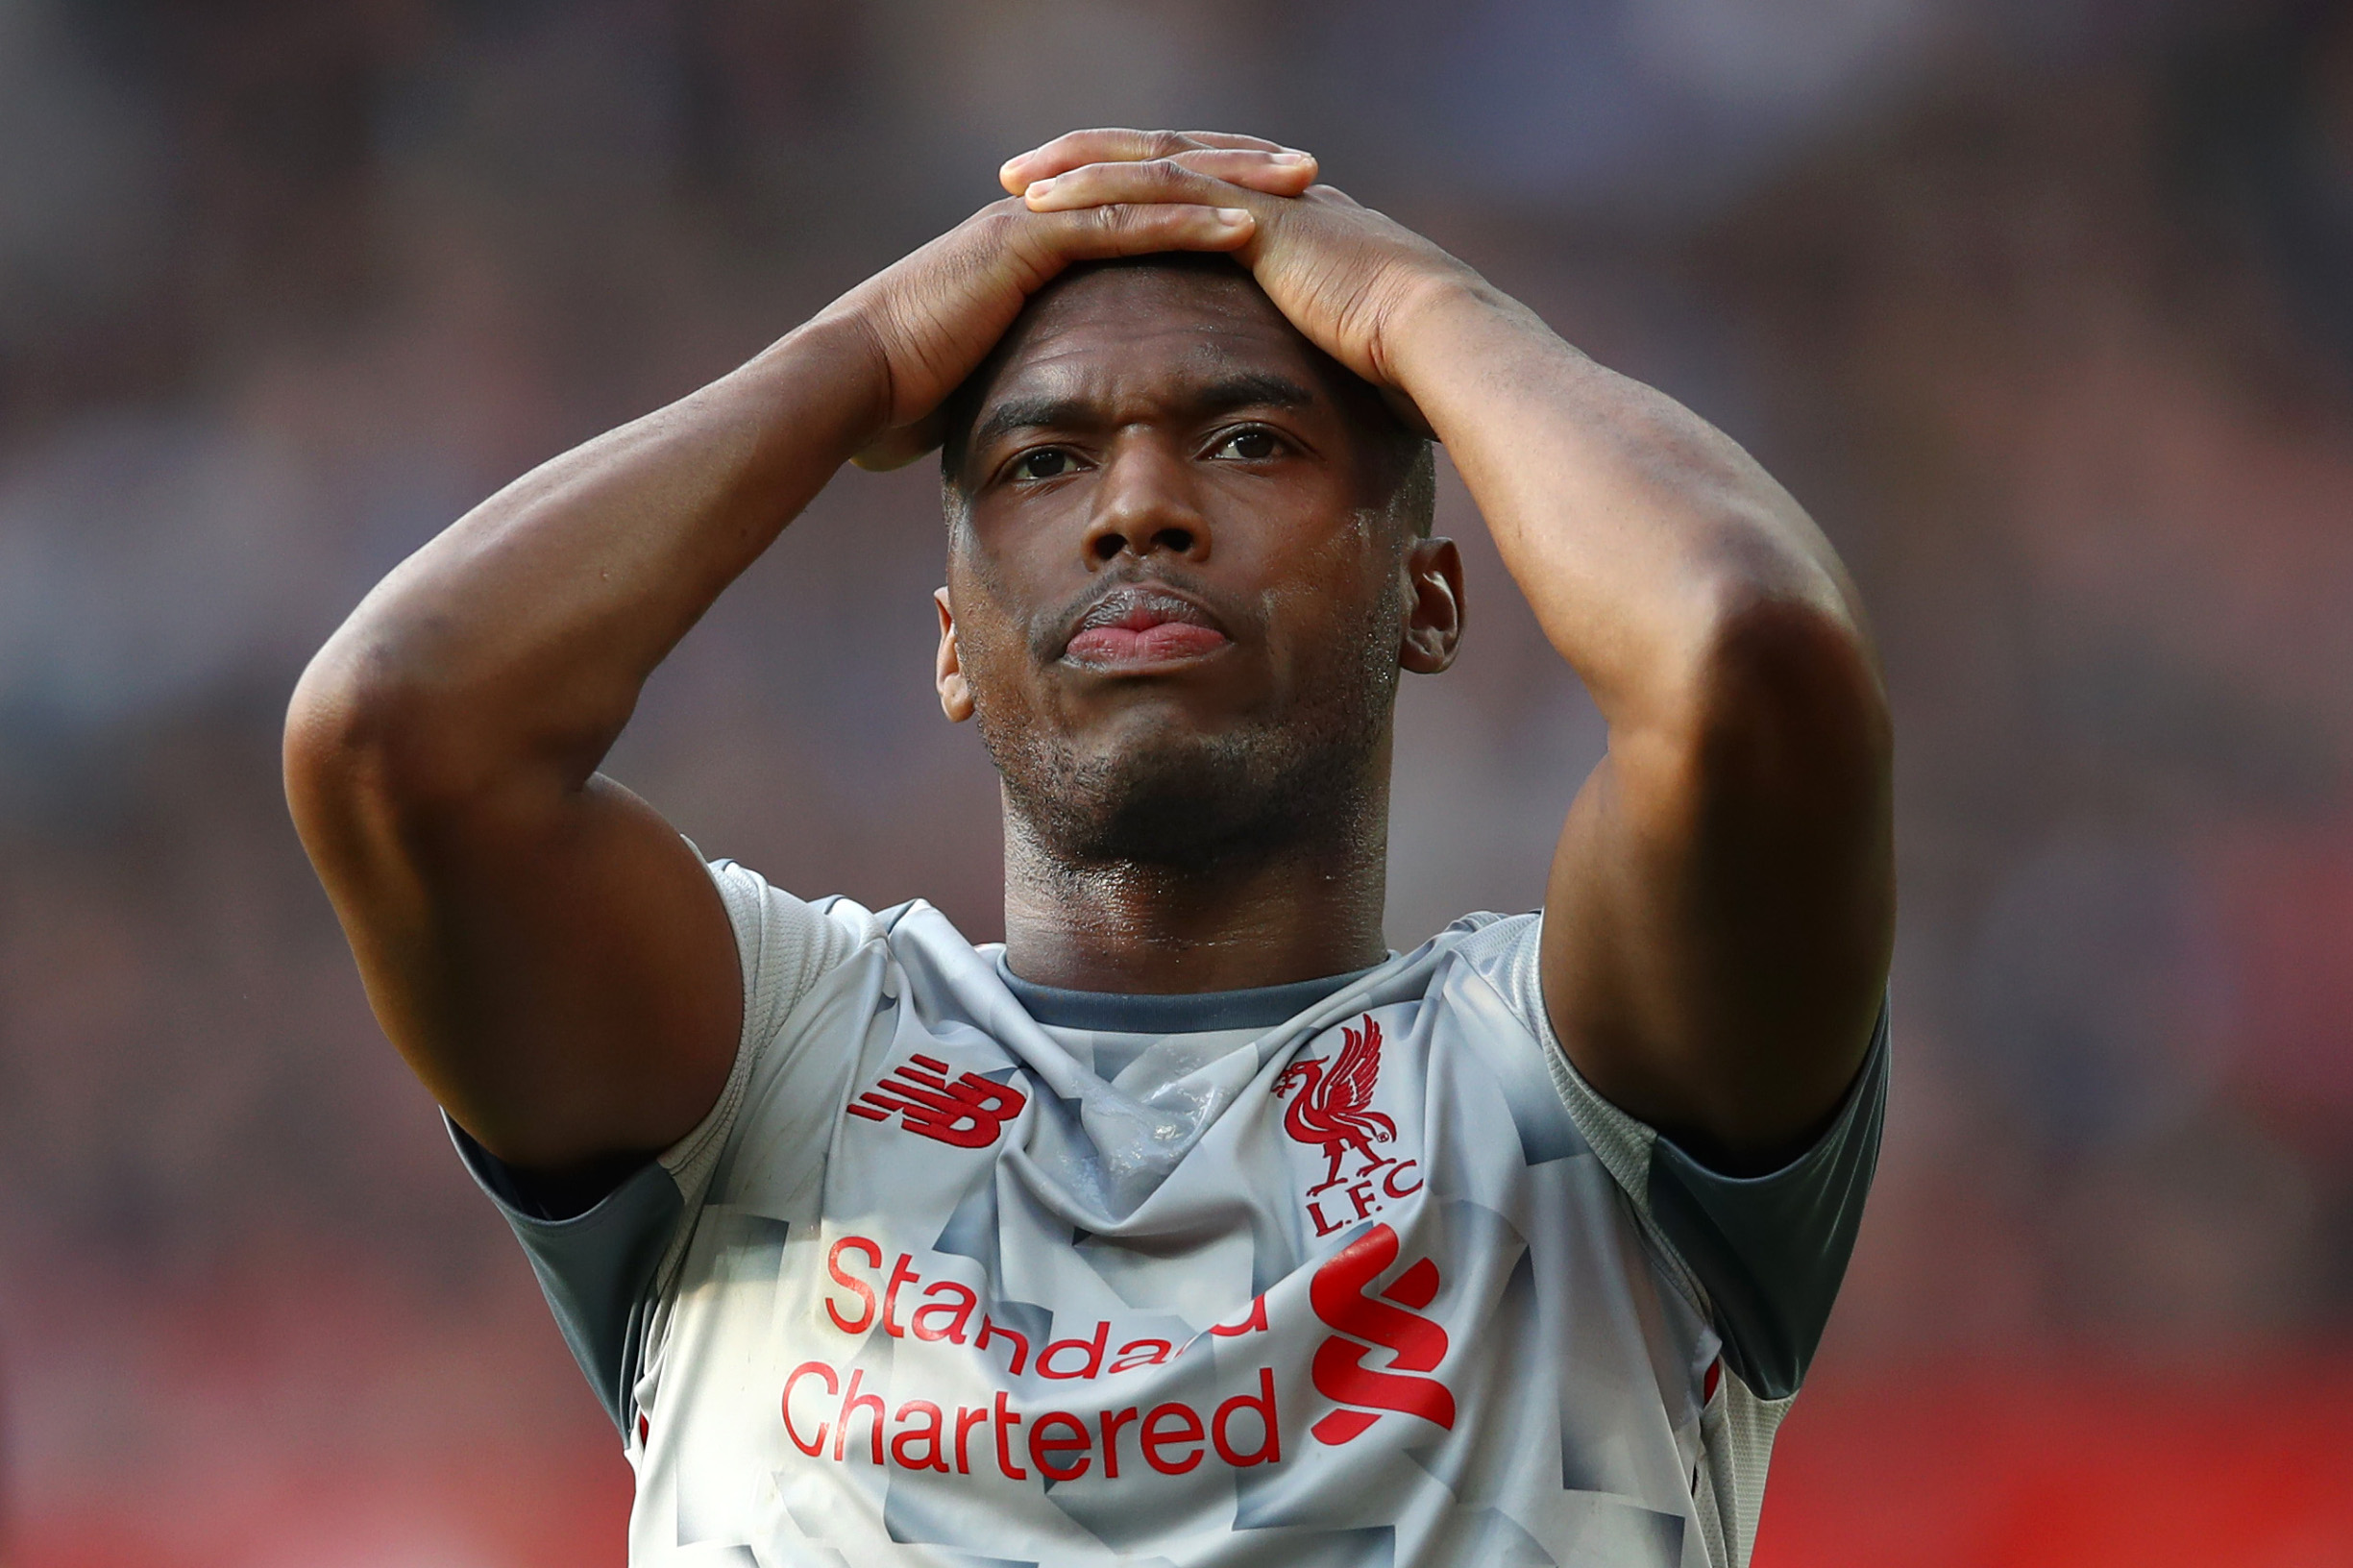 MANCHESTER, ENGLAND - FEBRUARY 24:  Daniel Sturridge of Liverpool reacts during the Premier League match between Manchester United and Liverpool FC at Old Trafford on February 24, 2019 in Manchester, United Kingdom.  (Photo by Clive Brunskill/Getty Images)